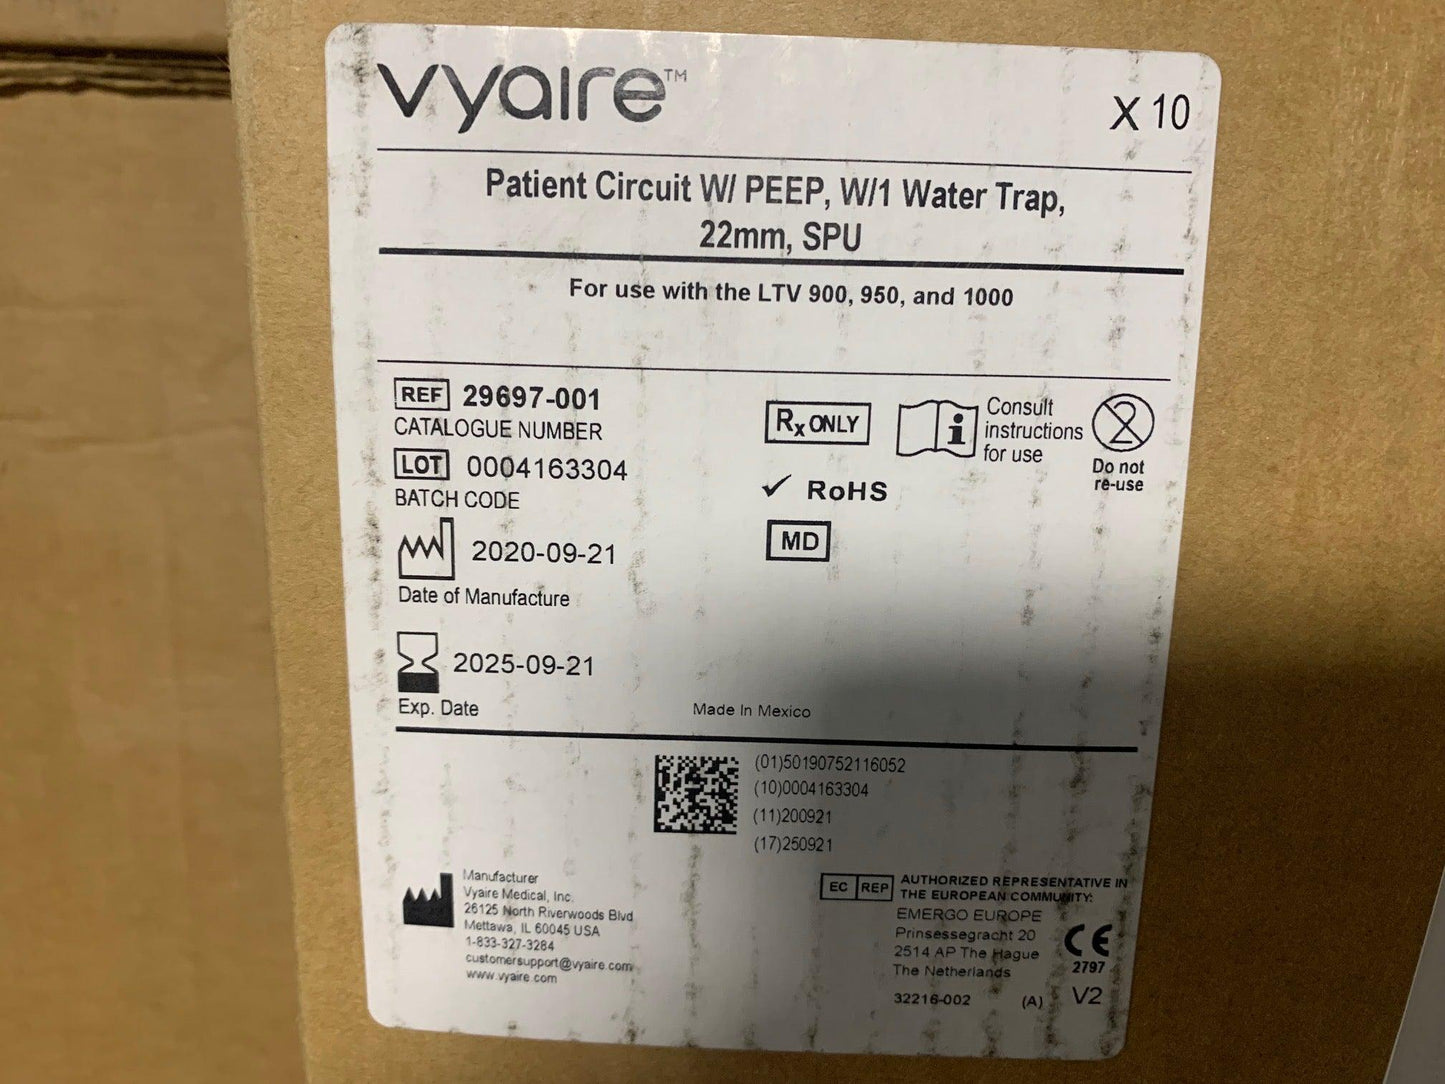 NEW 10PK CareFusion Vyaire Patient Circuit W/PEEP, W/1 Water Trap SPU 22mm 29697-001